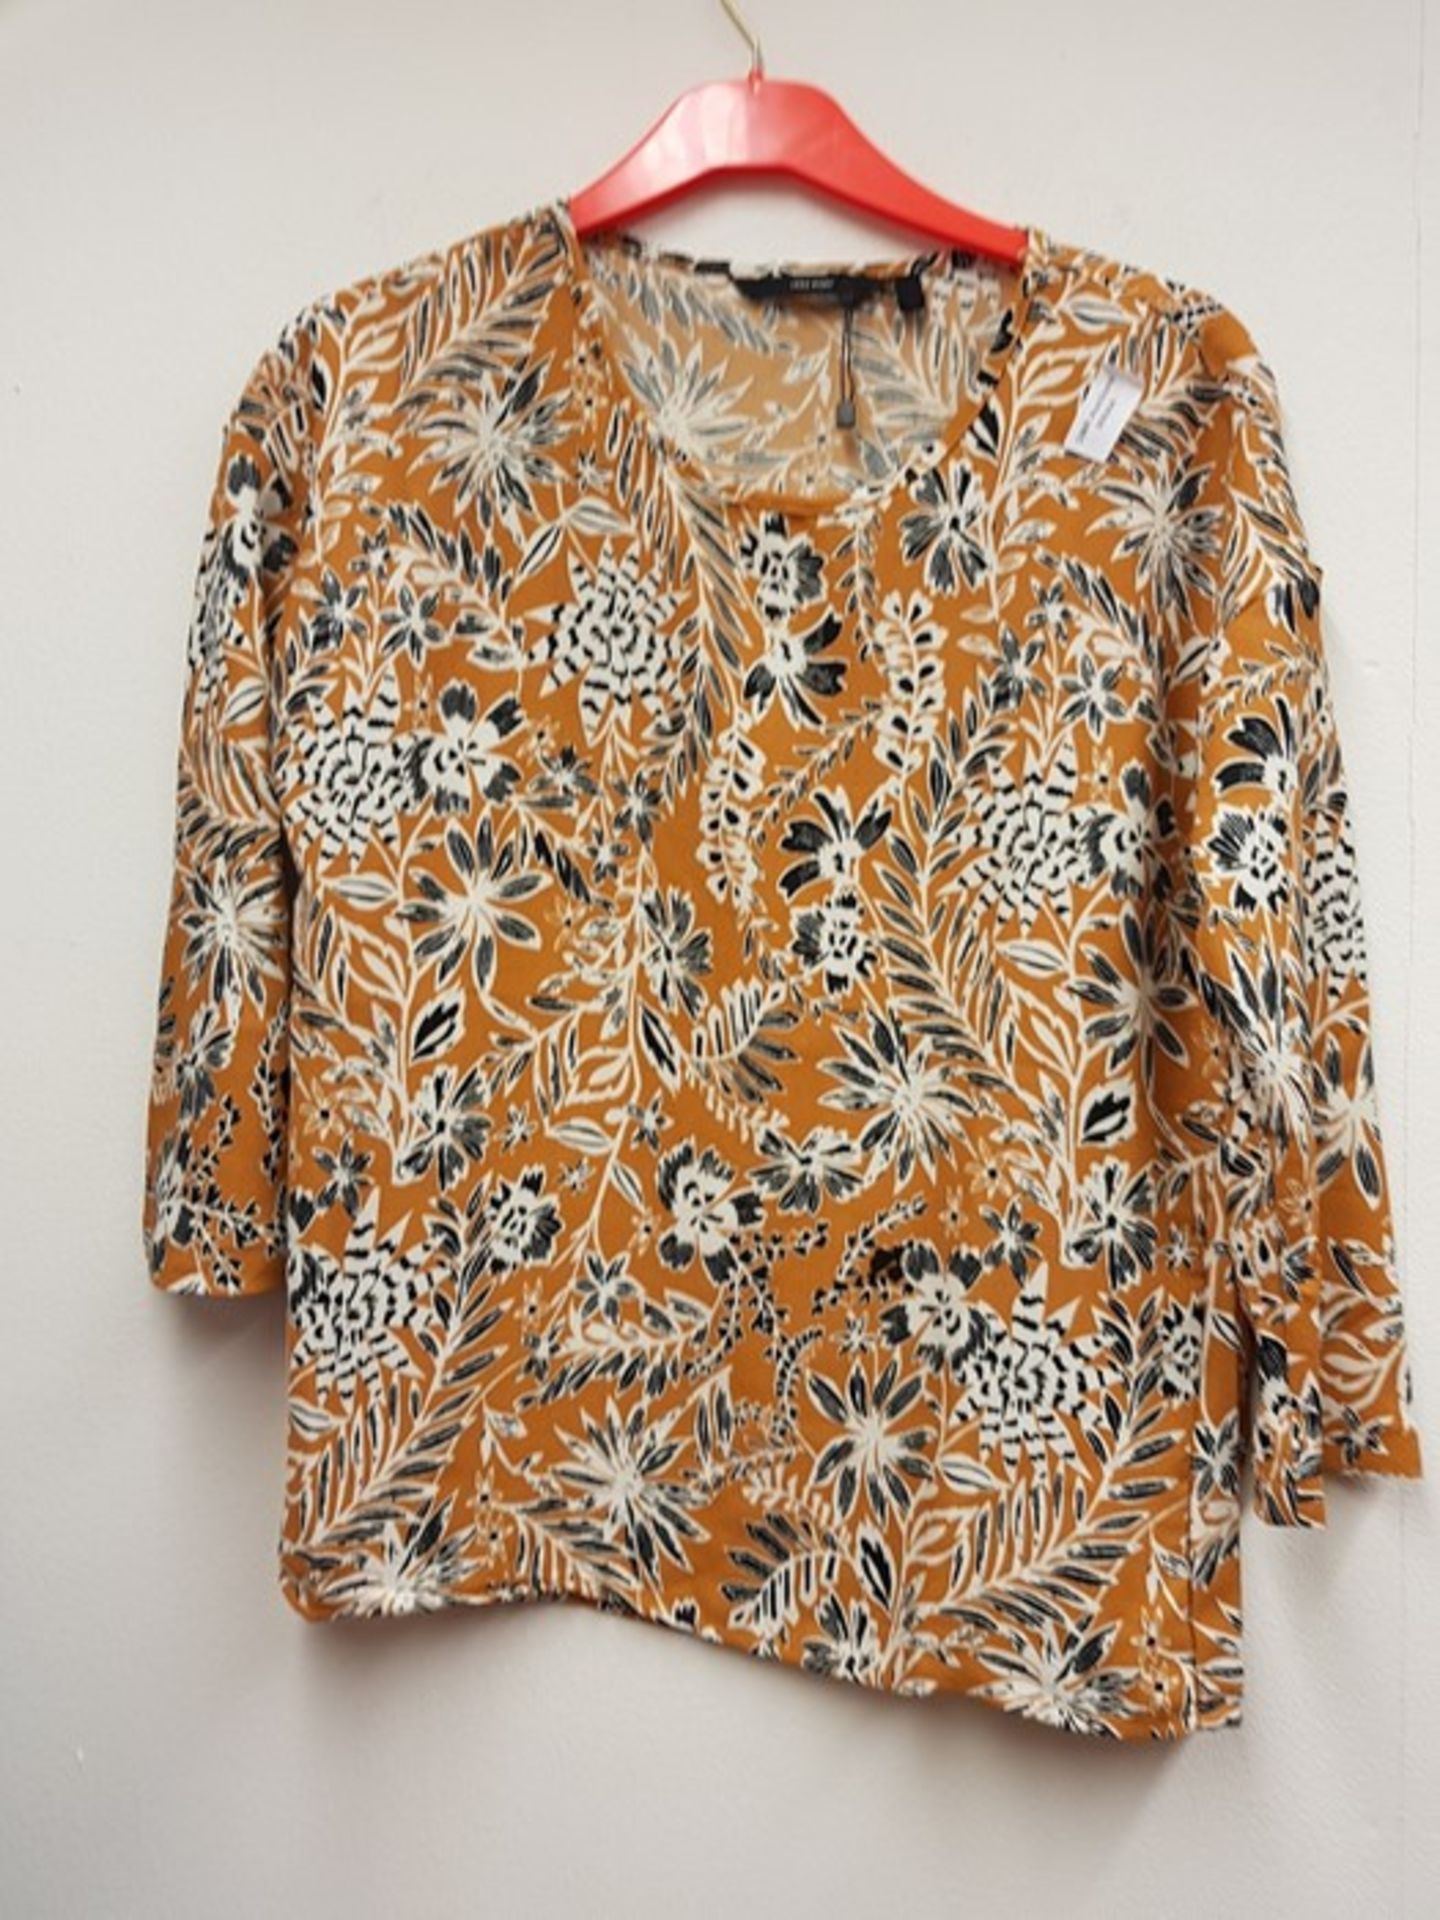 1 AS NEW ORANGE FLORAL TOP SMALL (VIEWING HIGHLY R